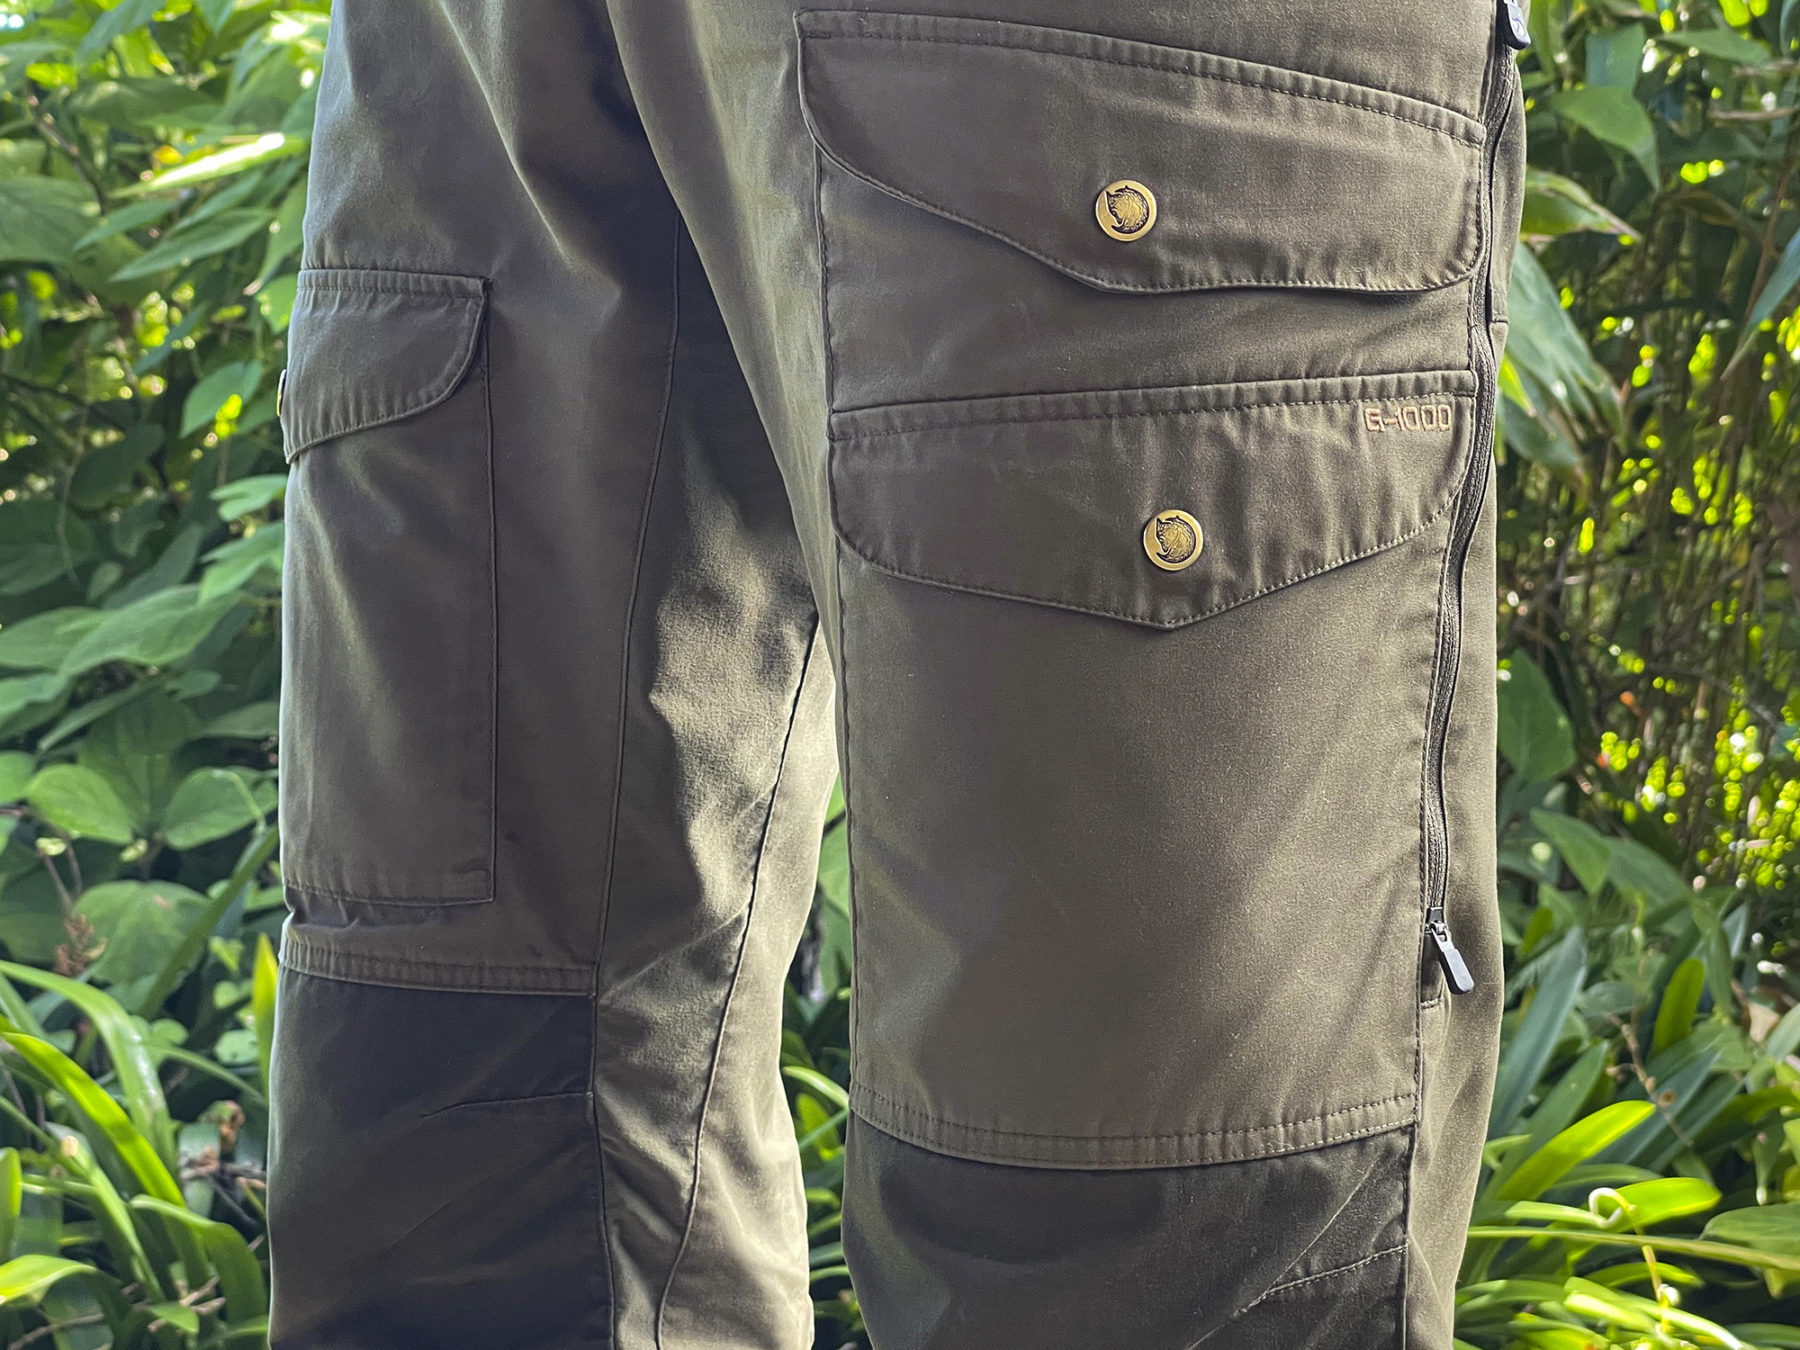 Fjallraven Vidda Pro Ventilated Trousers: Tested